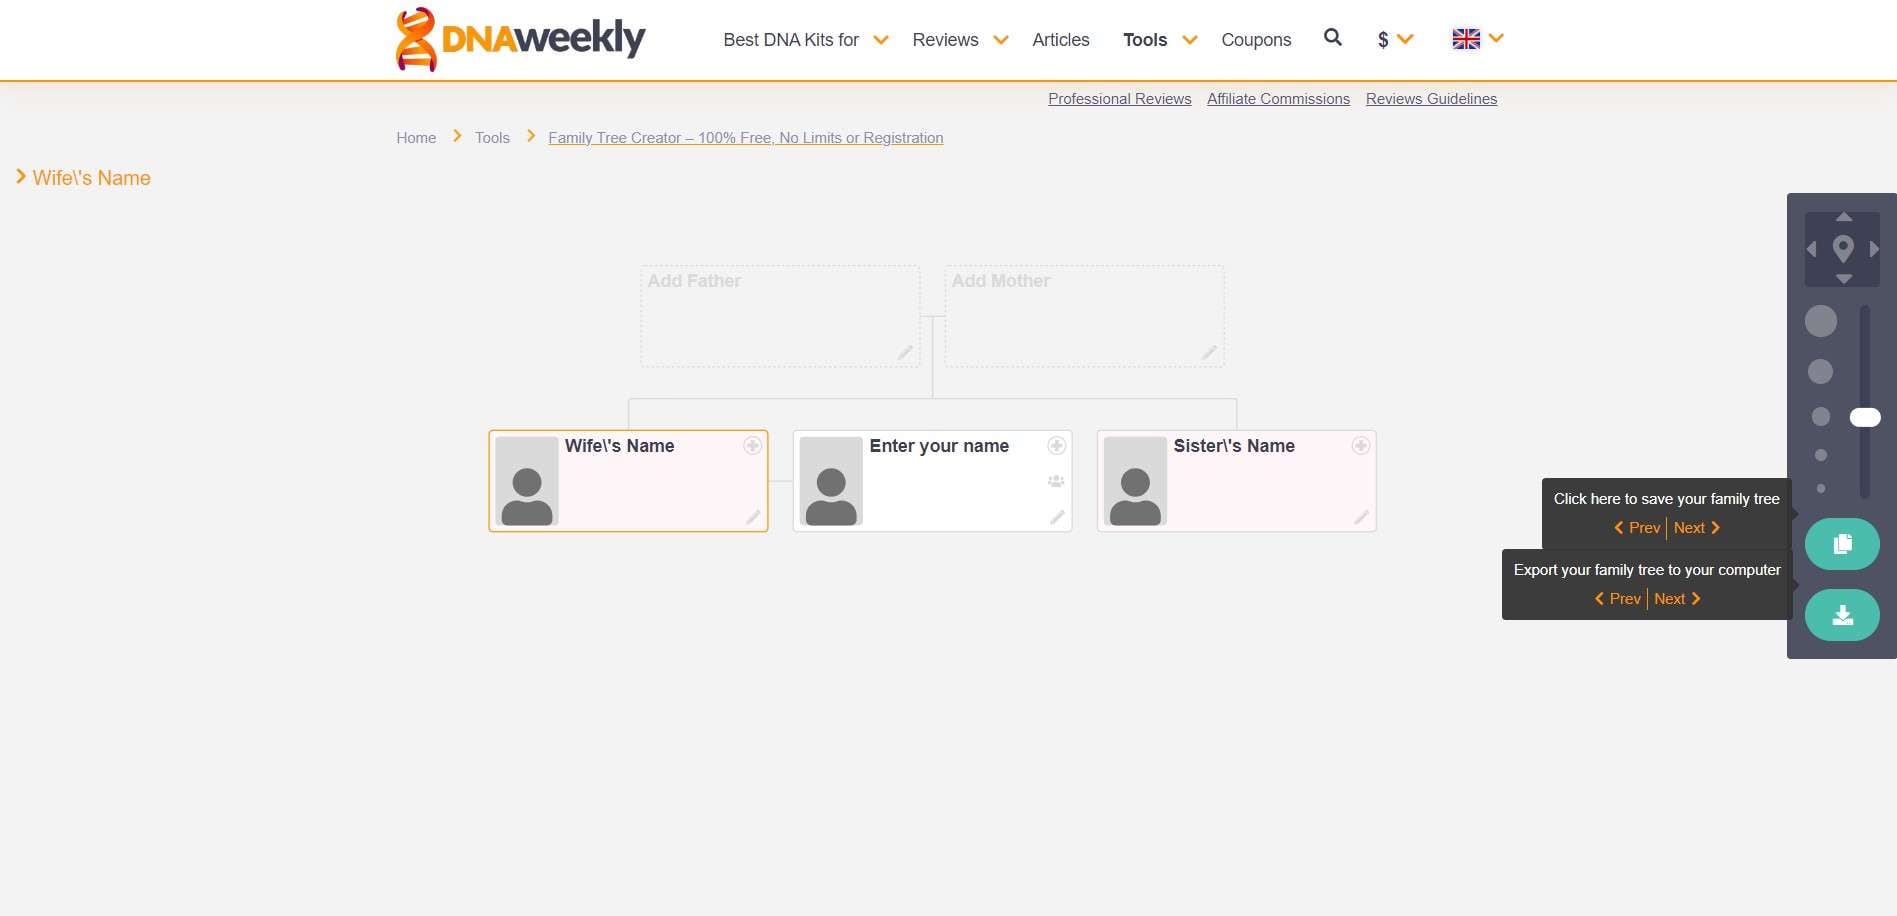 dnaweekly online interface